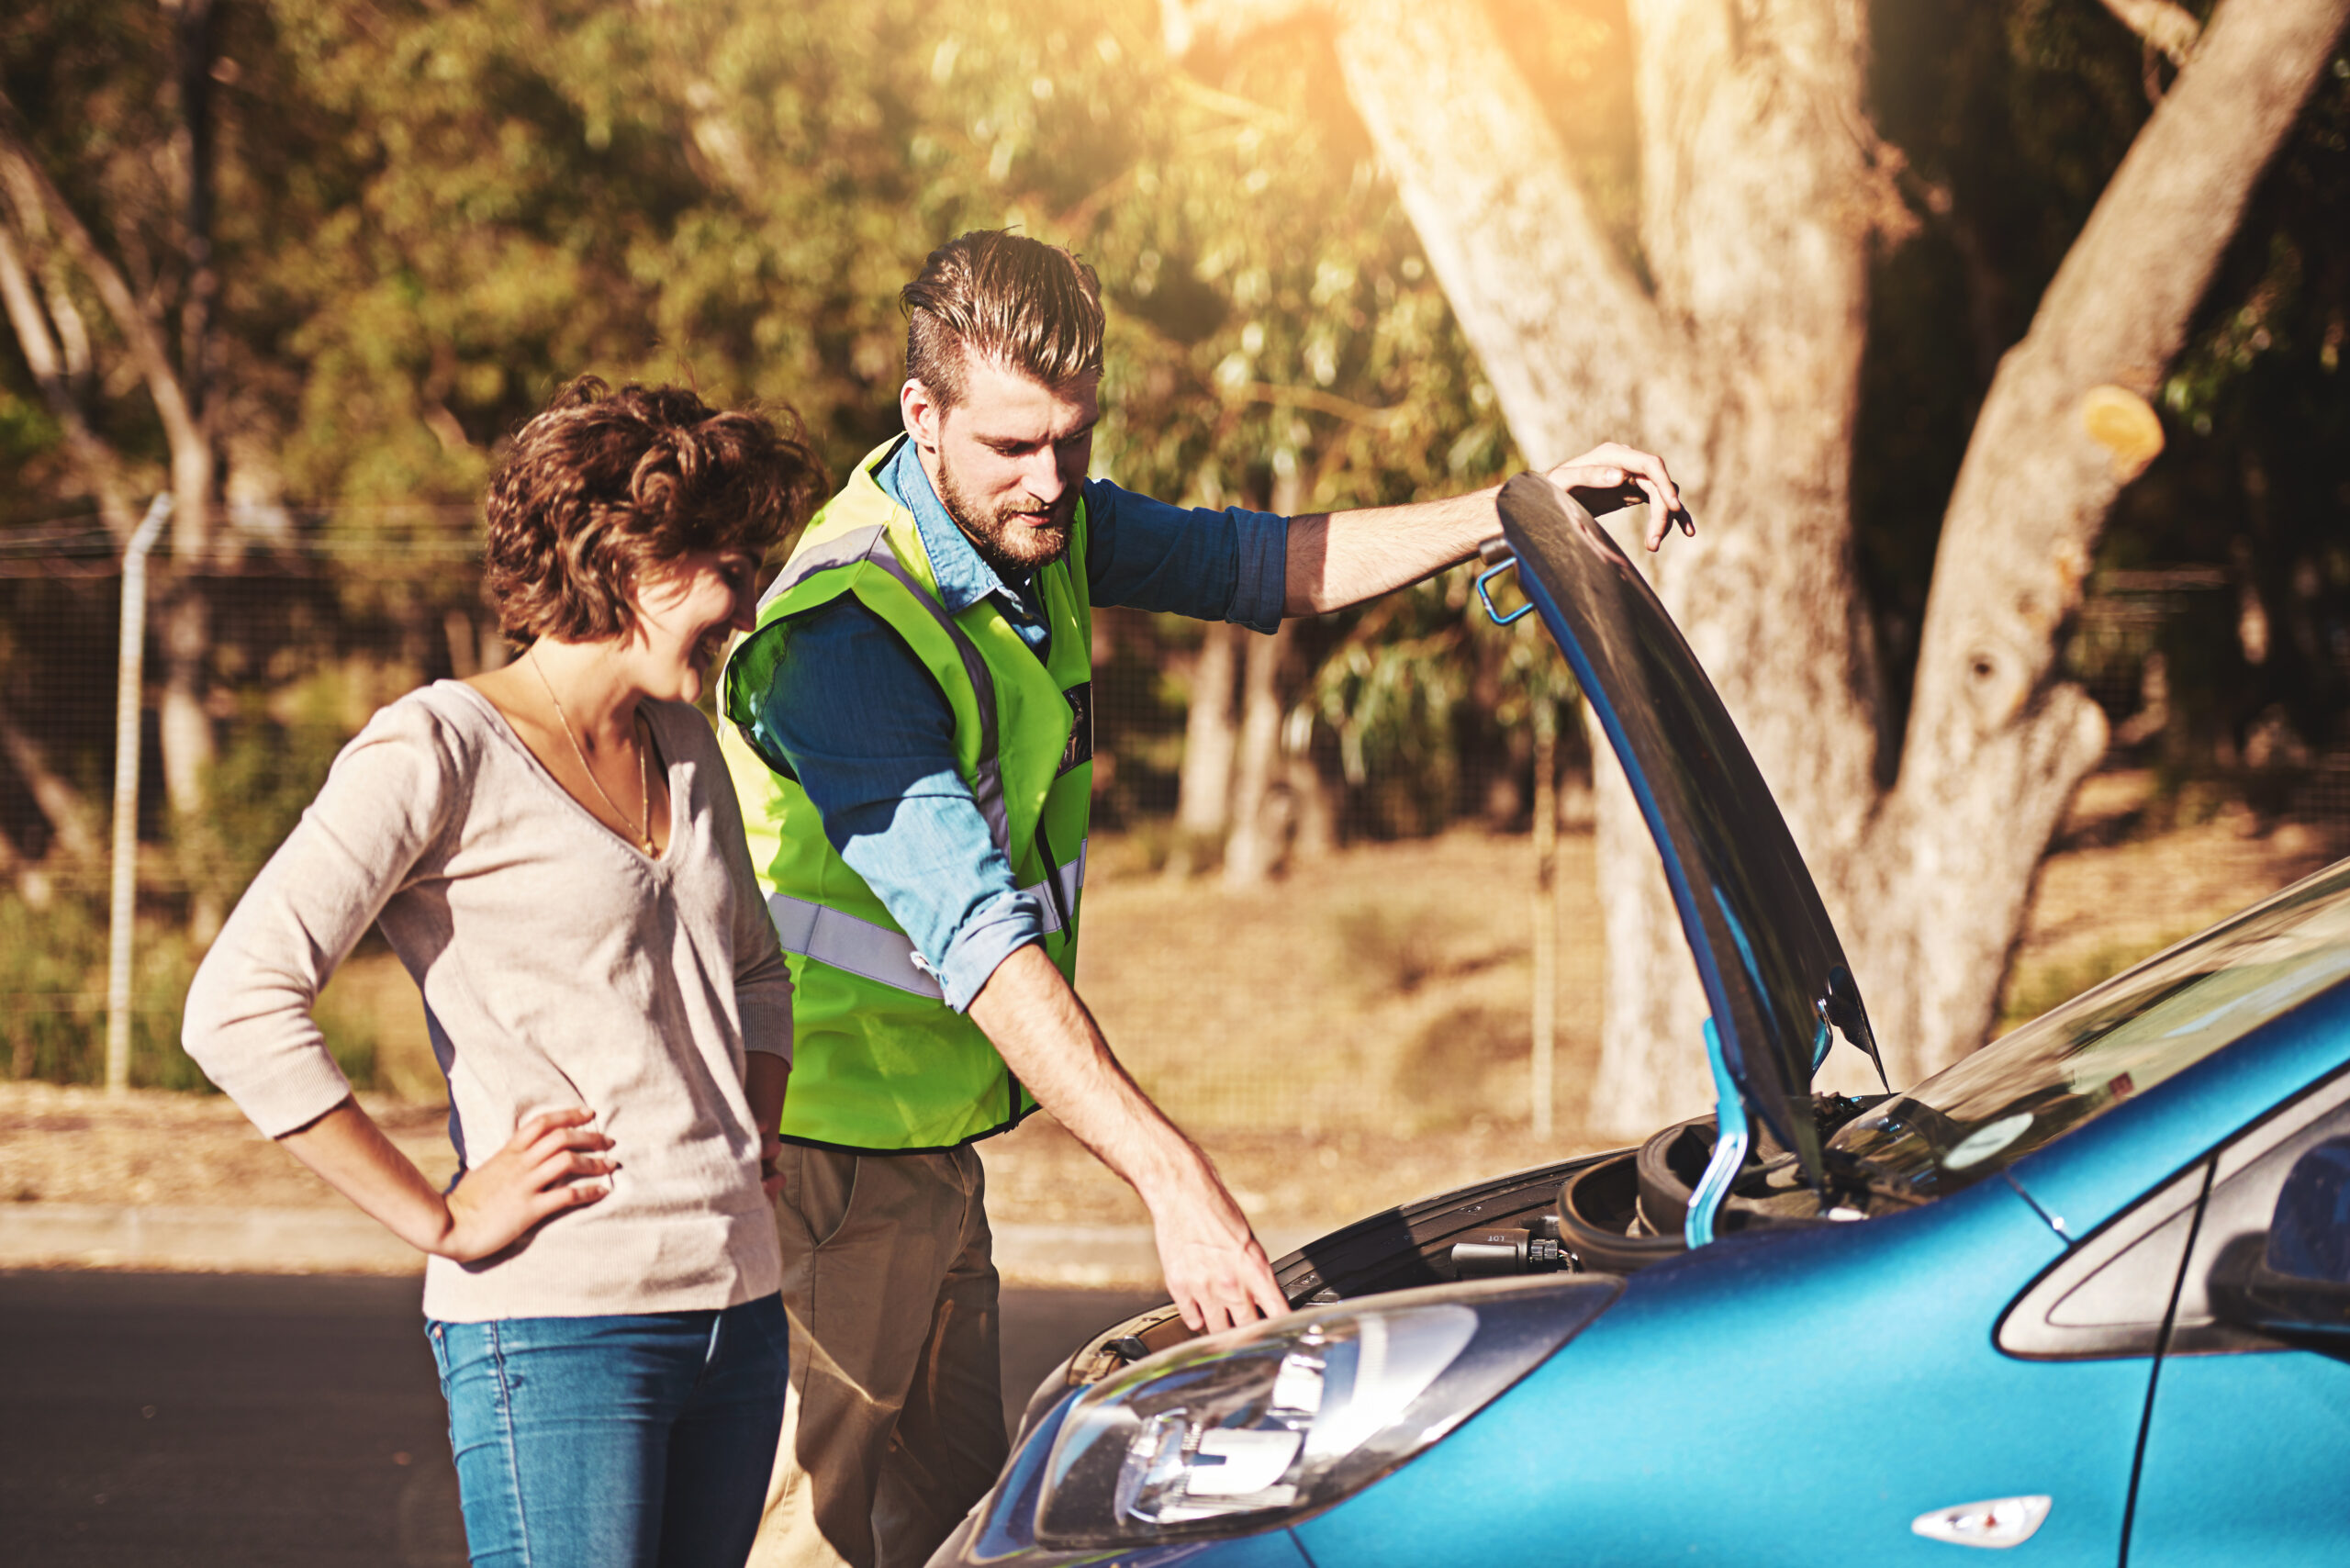 On the Go: How Roadside Assistance Can Save Your Day